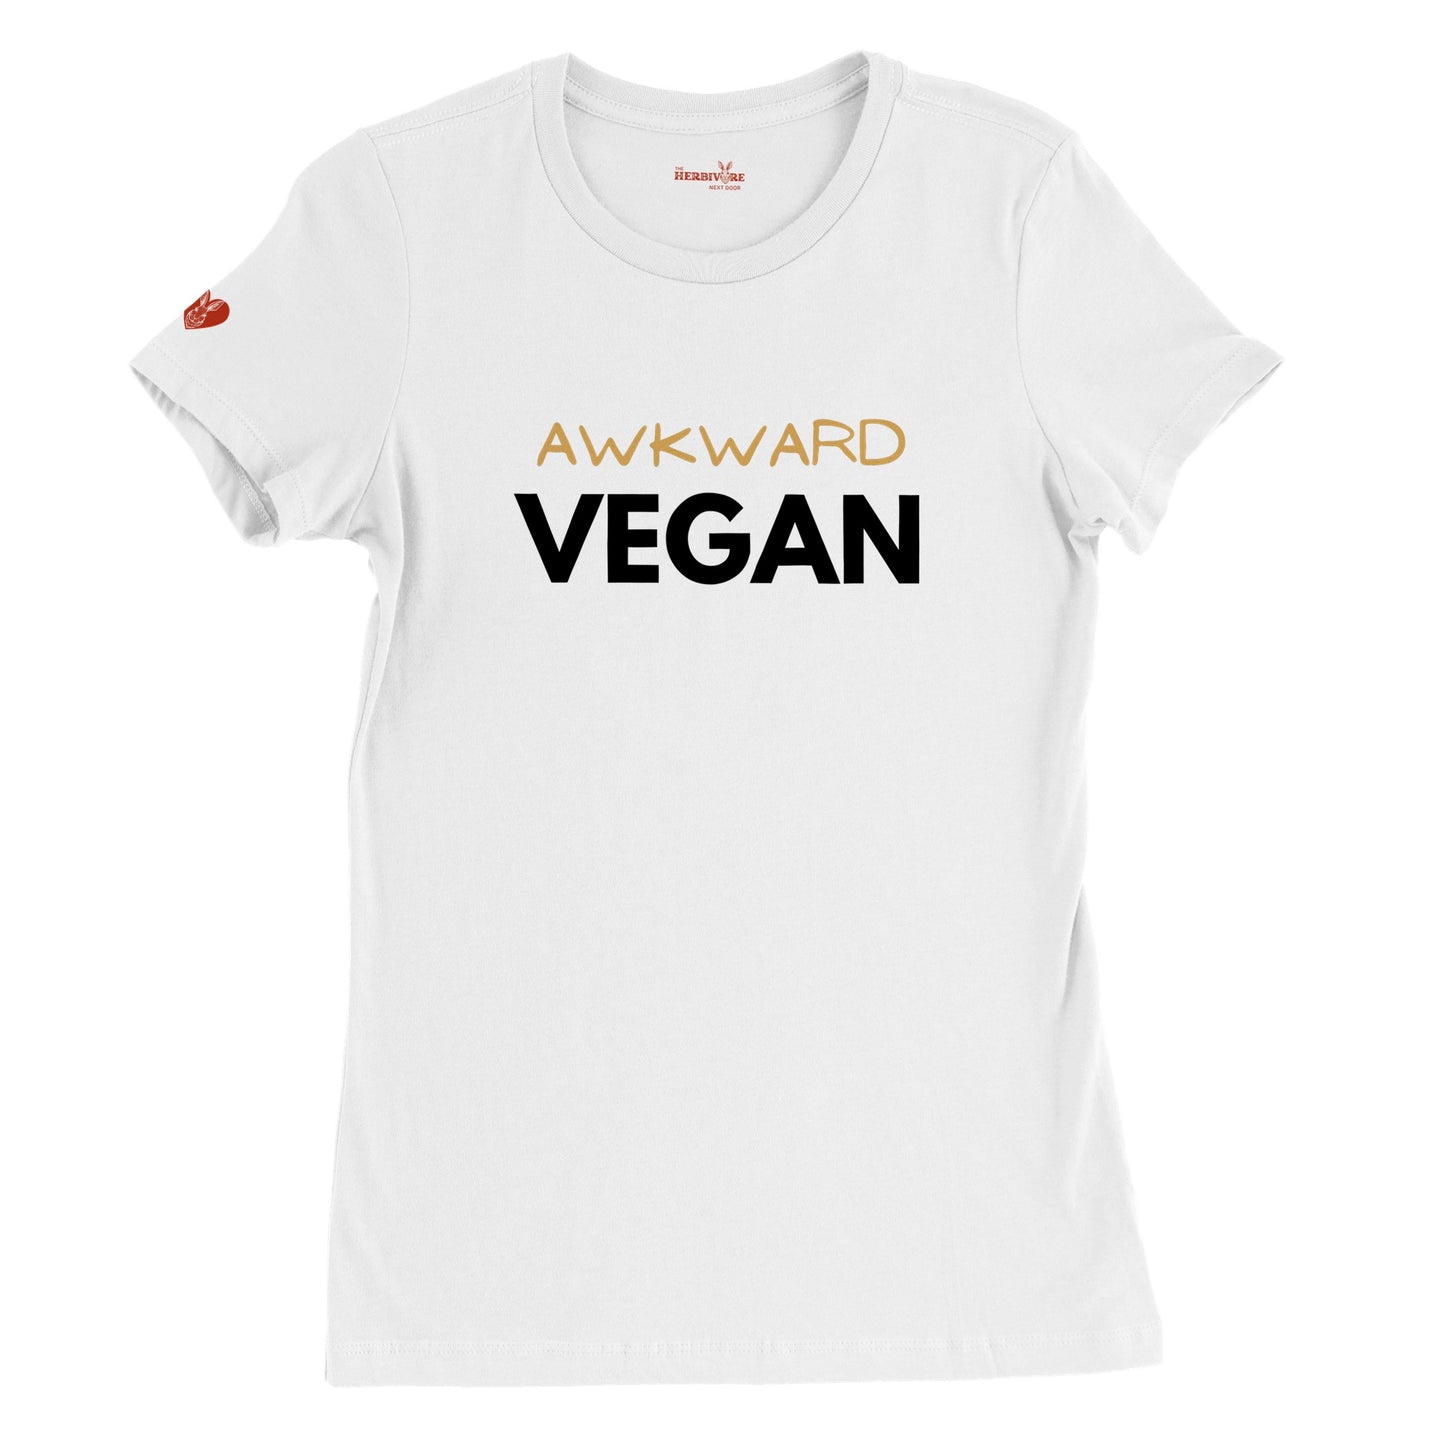 Awkward Vegan - Women's Style (Women's run small - get one size up from normal unisex)